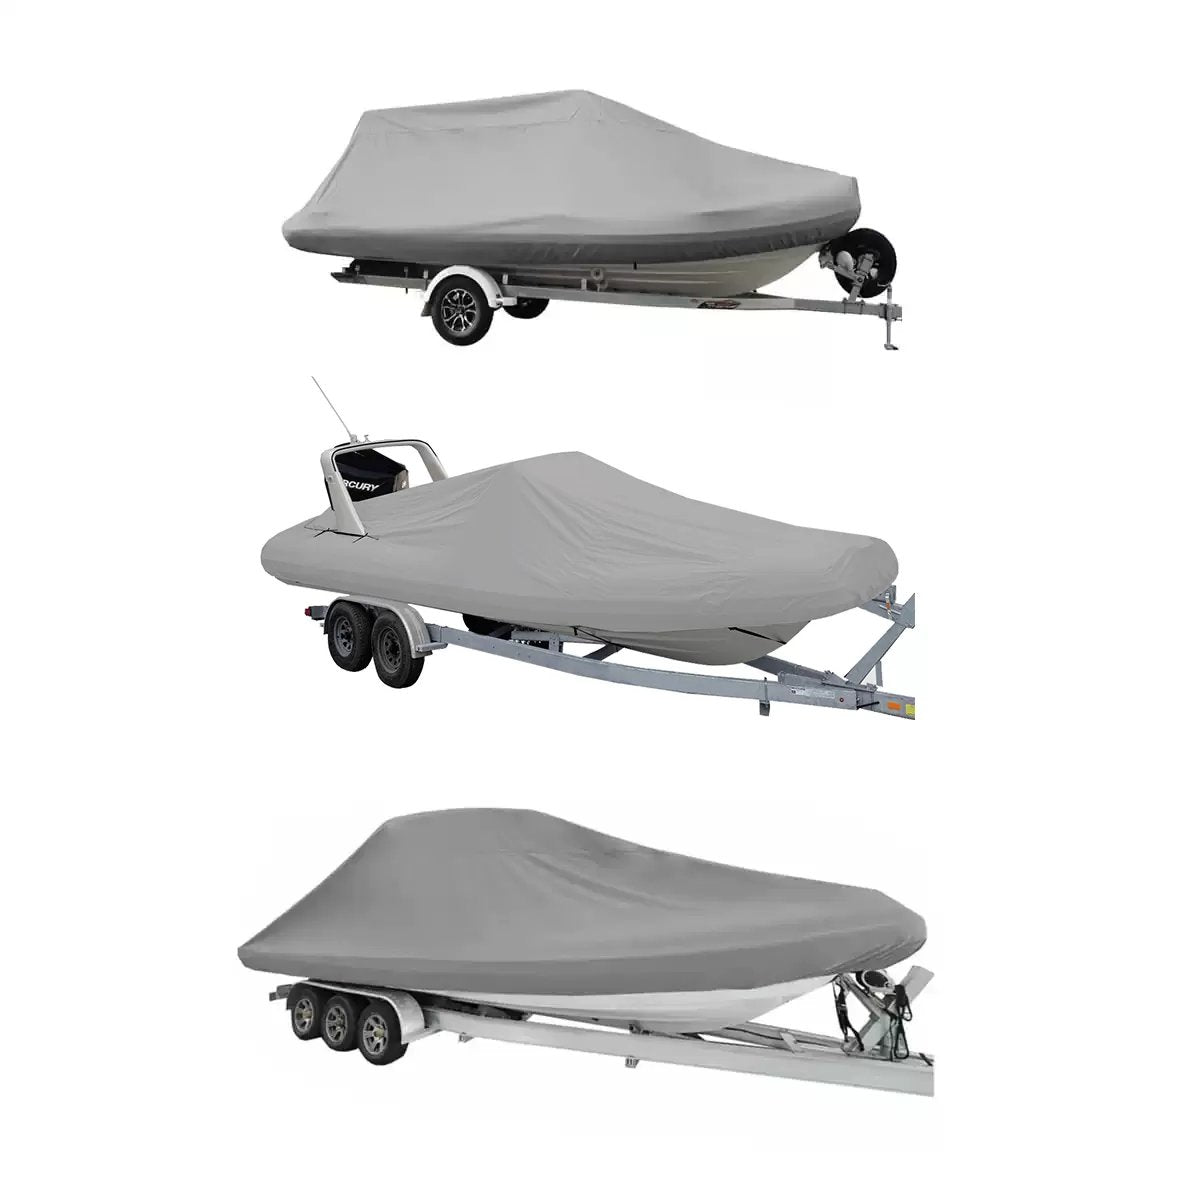 Image of 3 inflatable RIB Tender Boats on Trailers with Oceansouth Grey Covers on them.